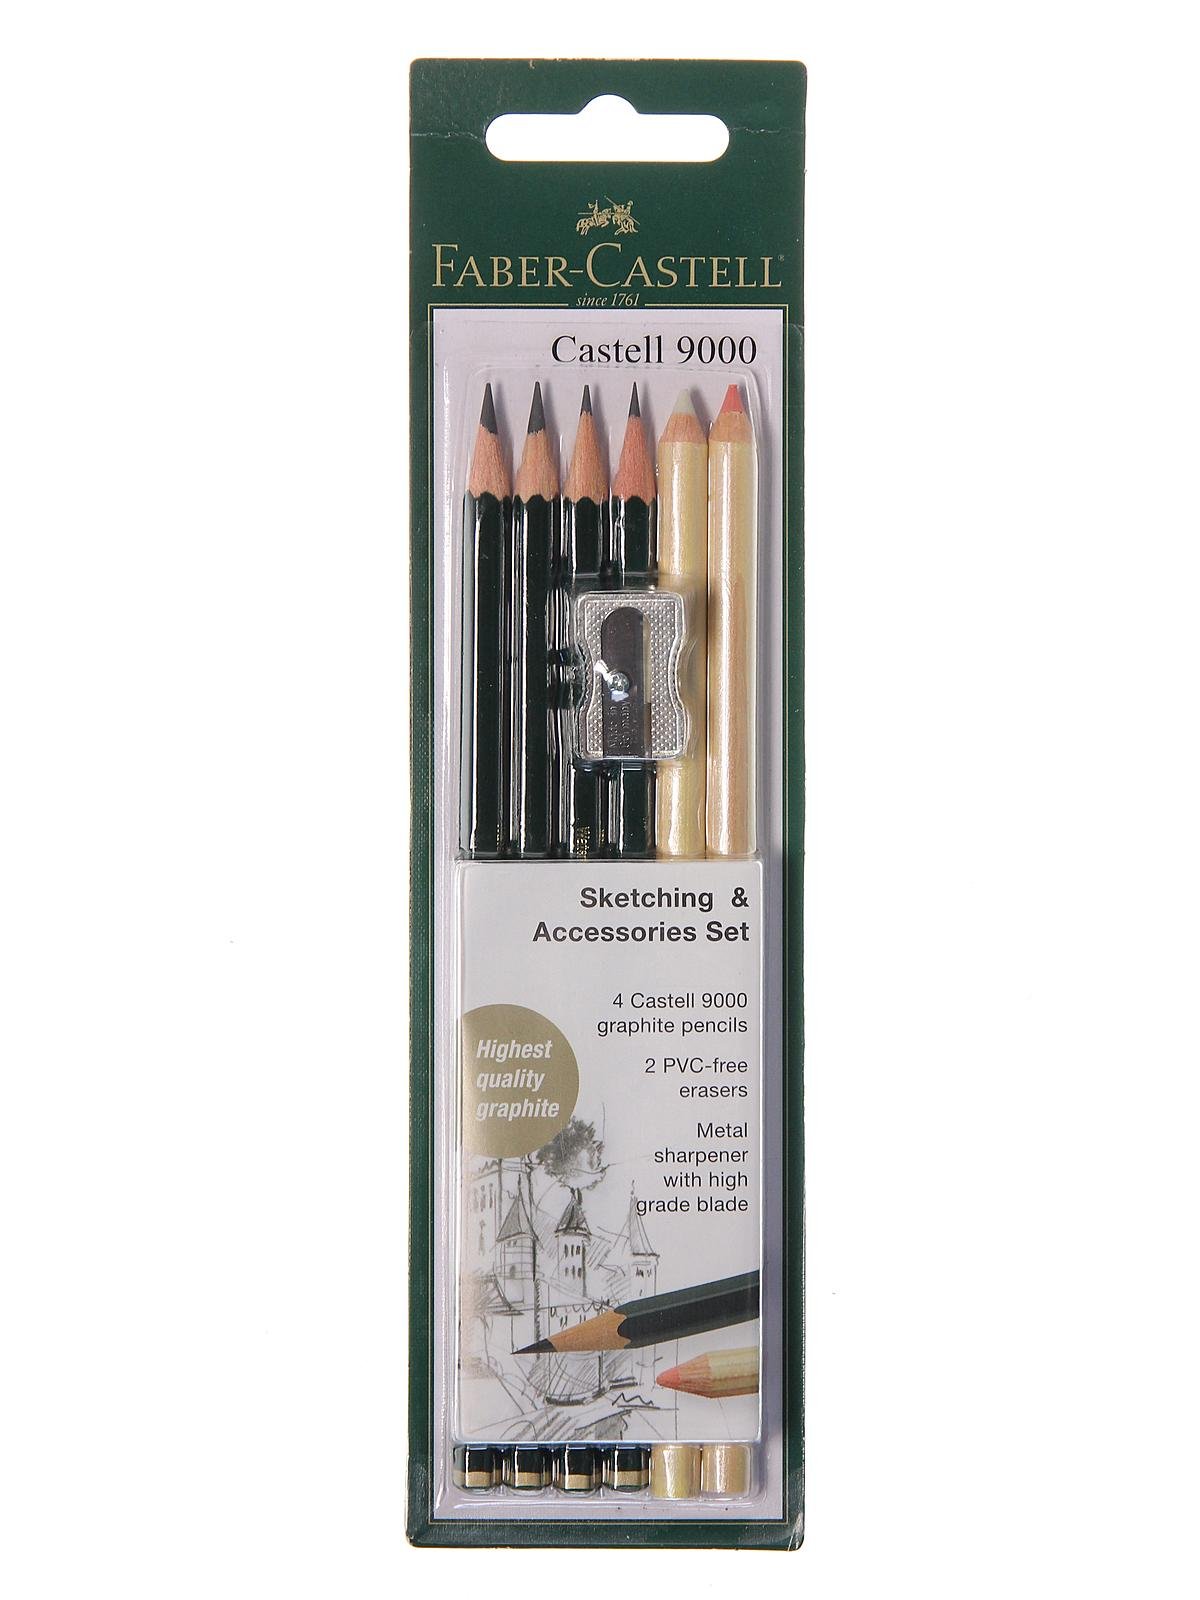 Faber-Castell Sketching and Accessories Set - Castell 9000 Graphite Pencils  and Eraser Pencils - Art Pencils for Drawing and Shading